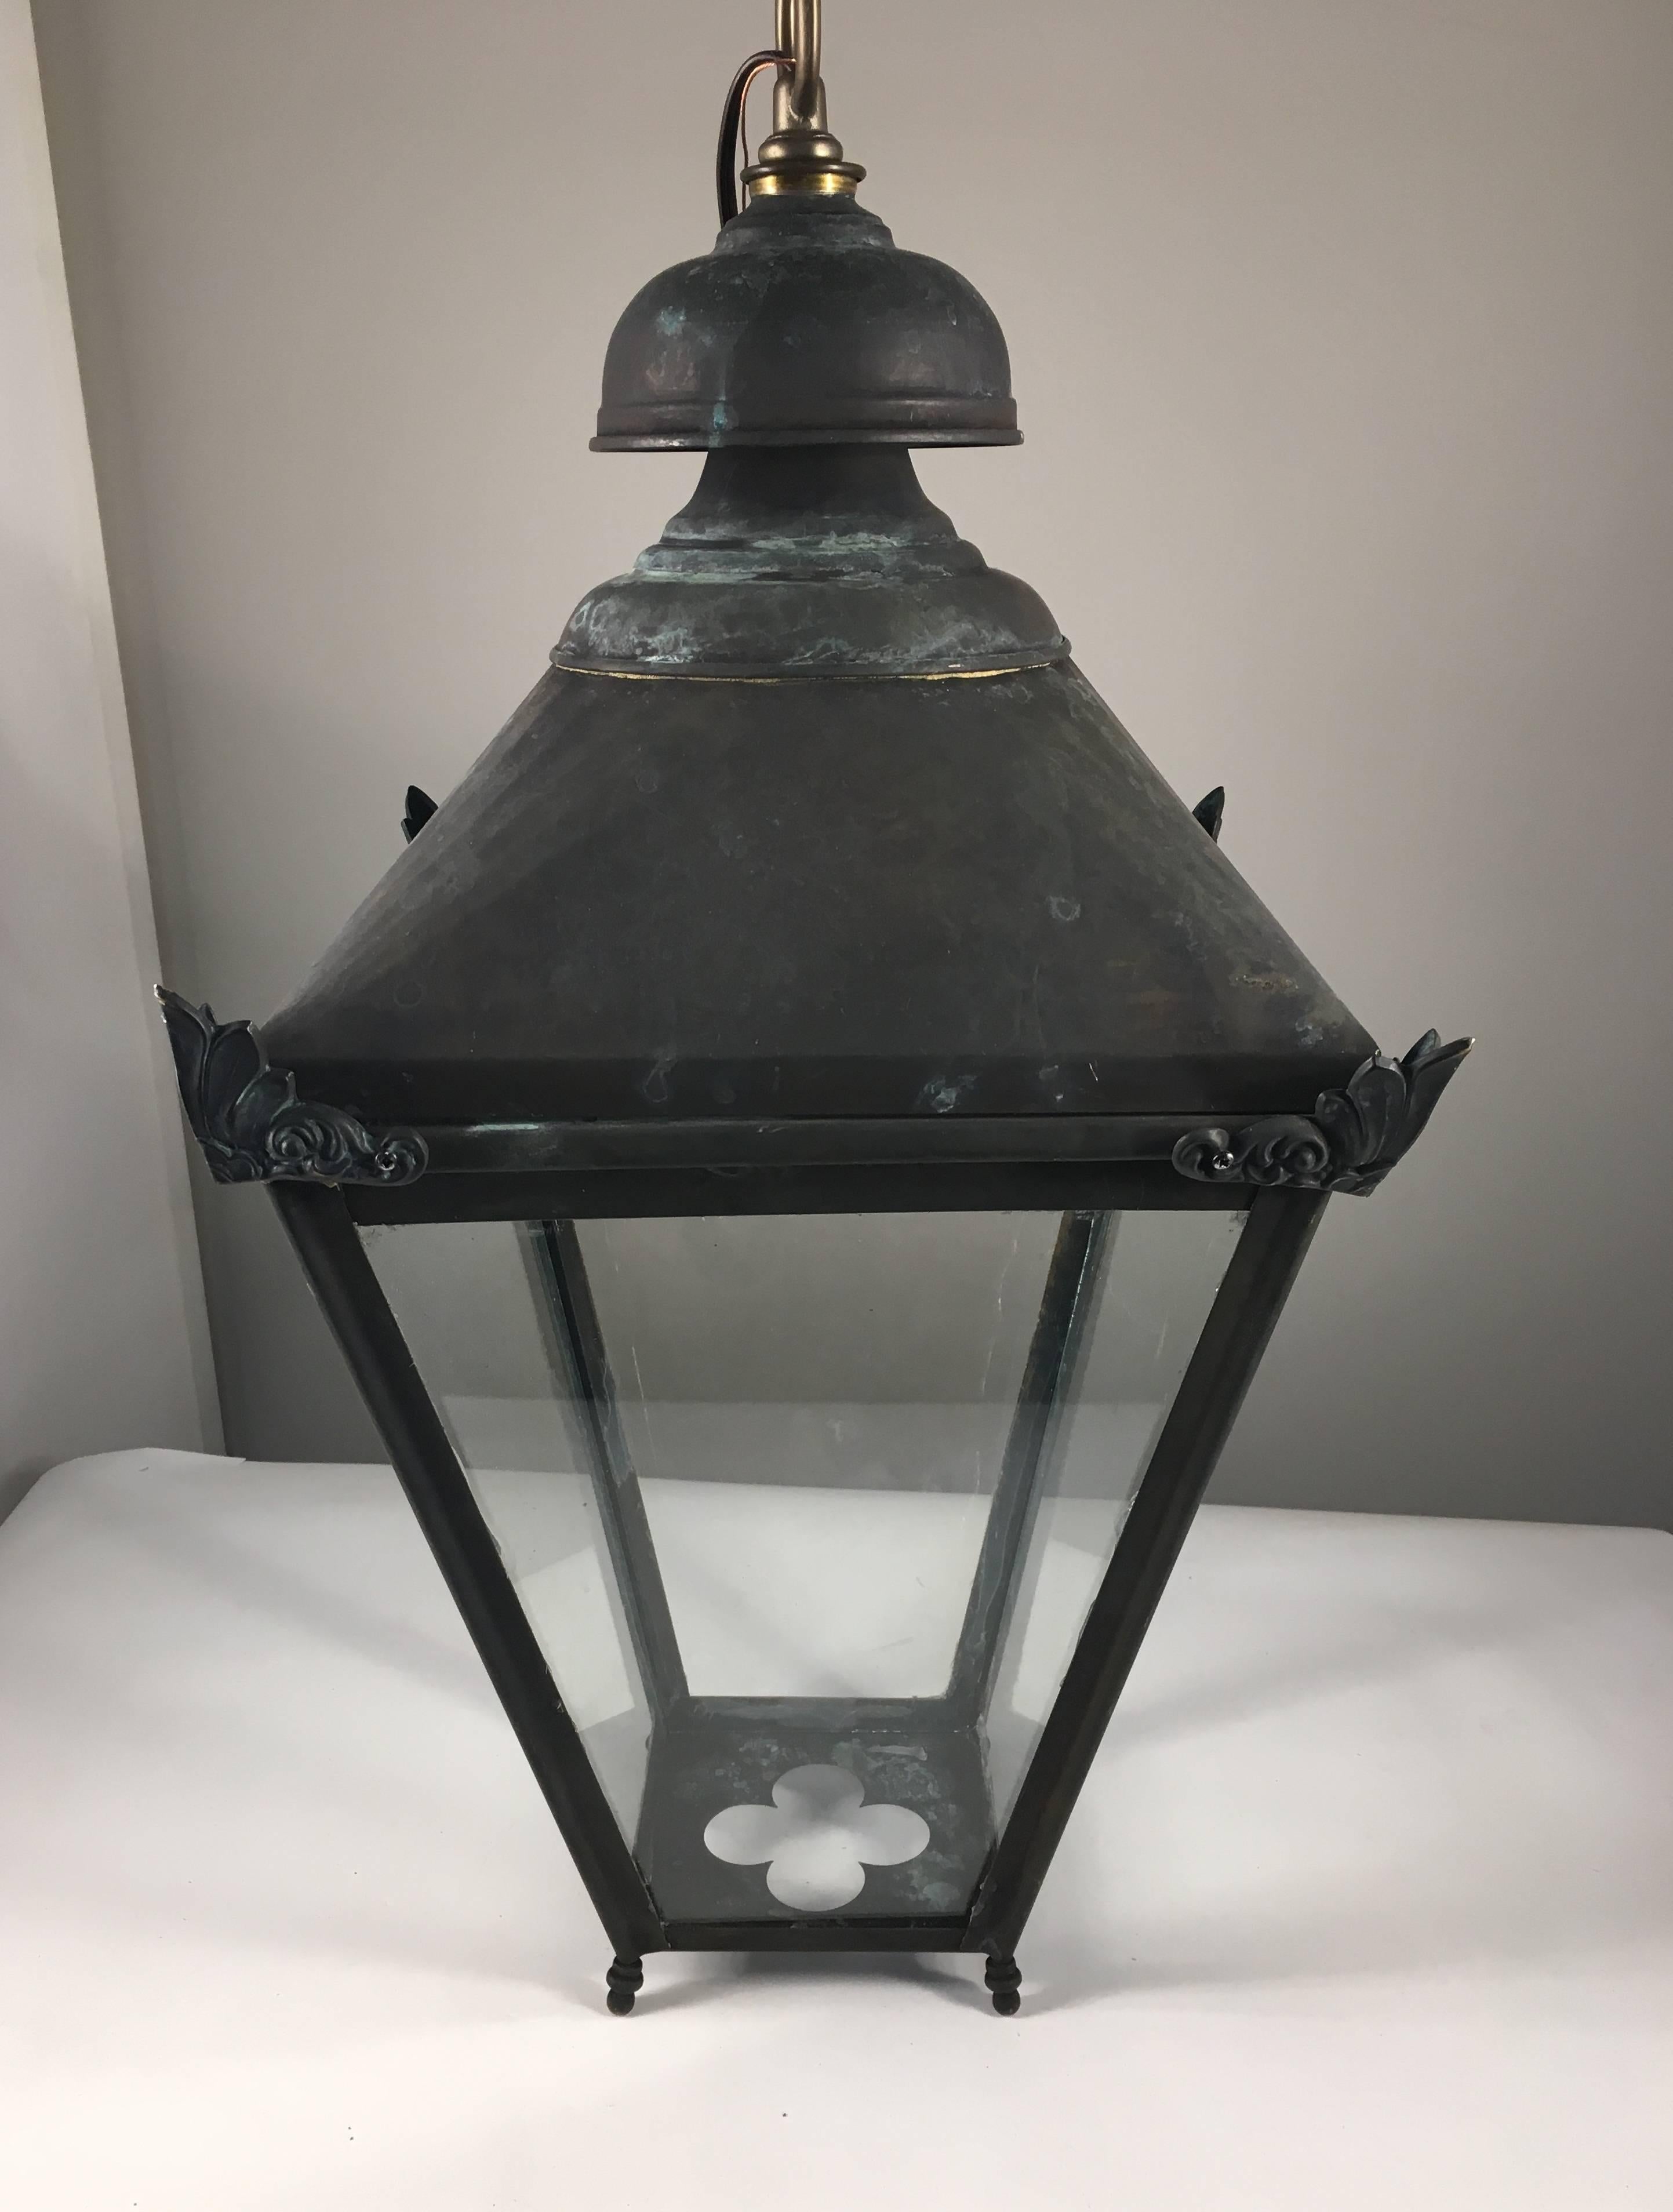 A nice hanging hall lantern in copper with glass panes on four sides, 20th century, recently wired with a porcelain socket at the top. Excellent condition.